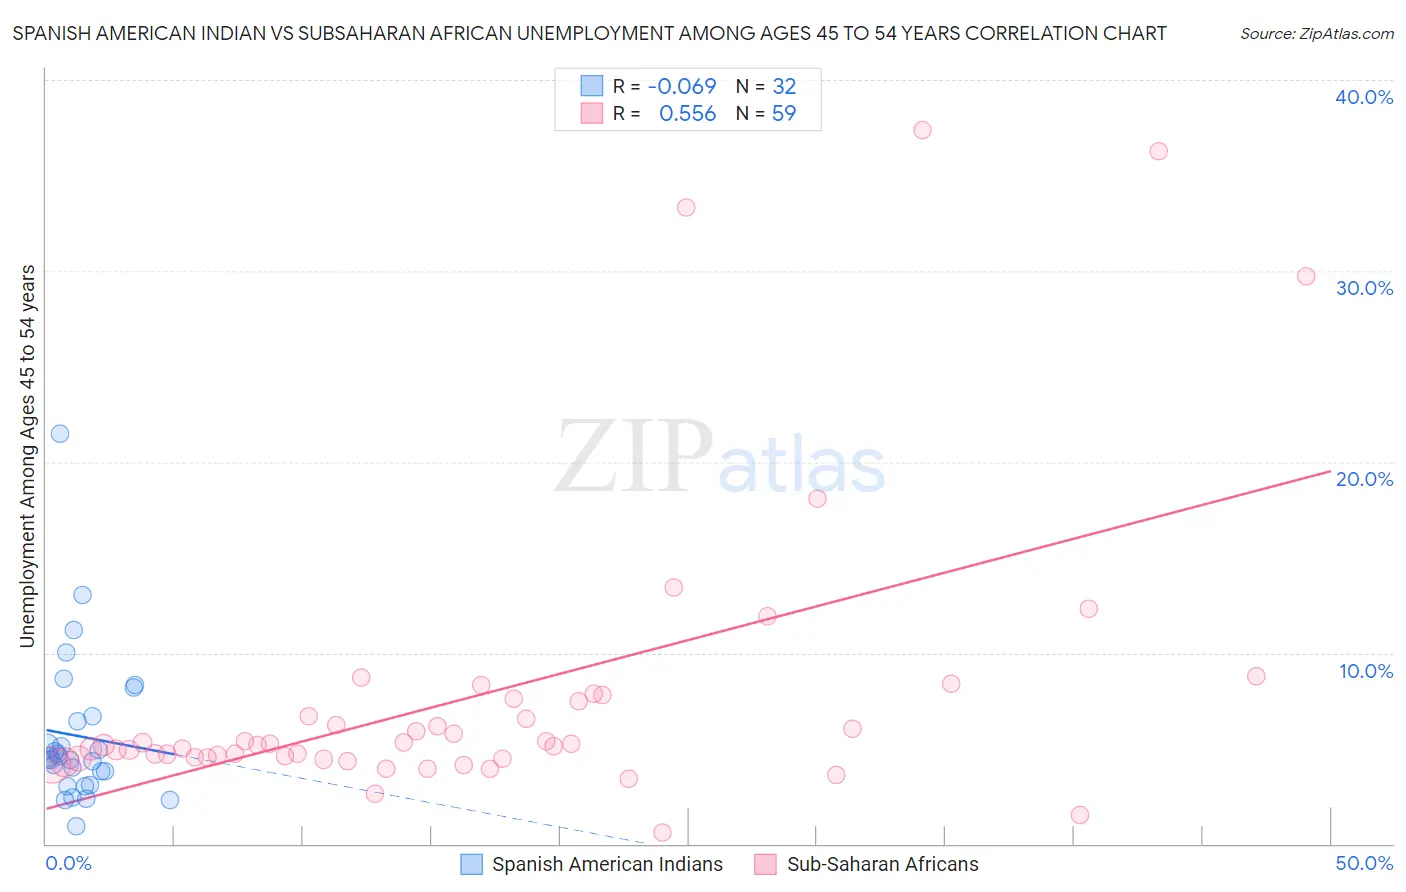 Spanish American Indian vs Subsaharan African Unemployment Among Ages 45 to 54 years